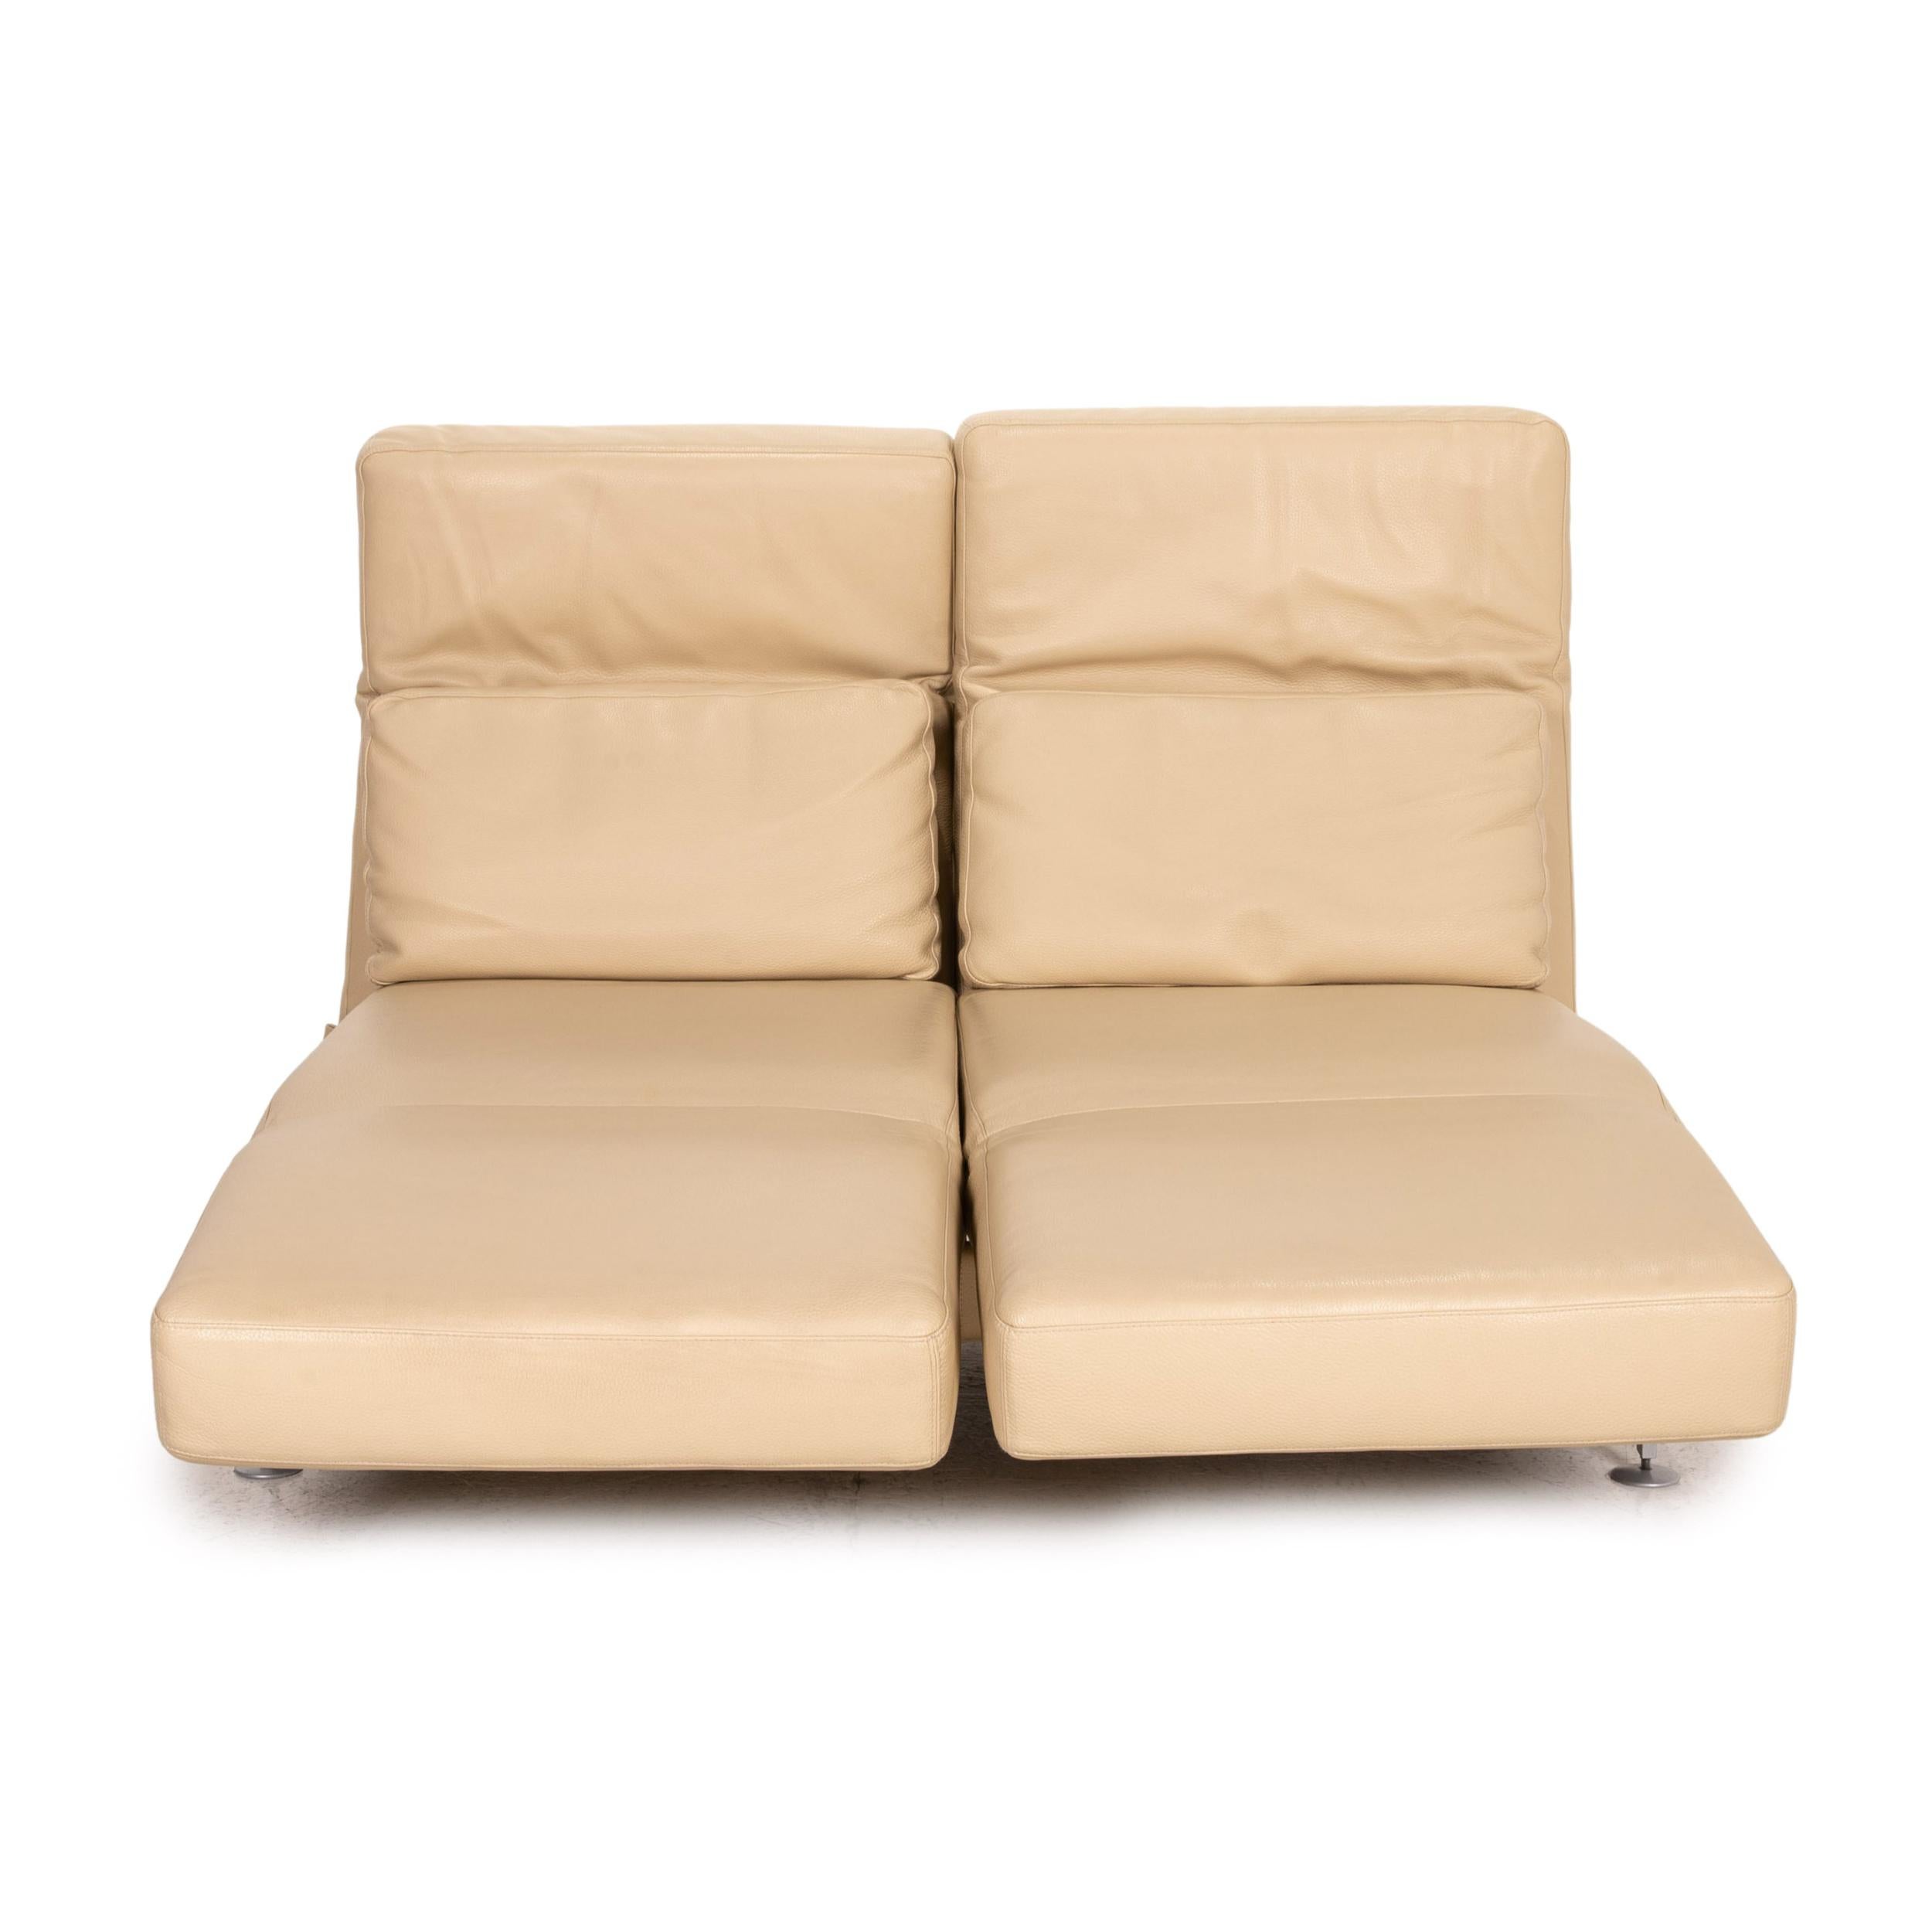 Brühl & Sippold Moule Leather Sofa Cream Two-Seater Function Relax Function For Sale 2